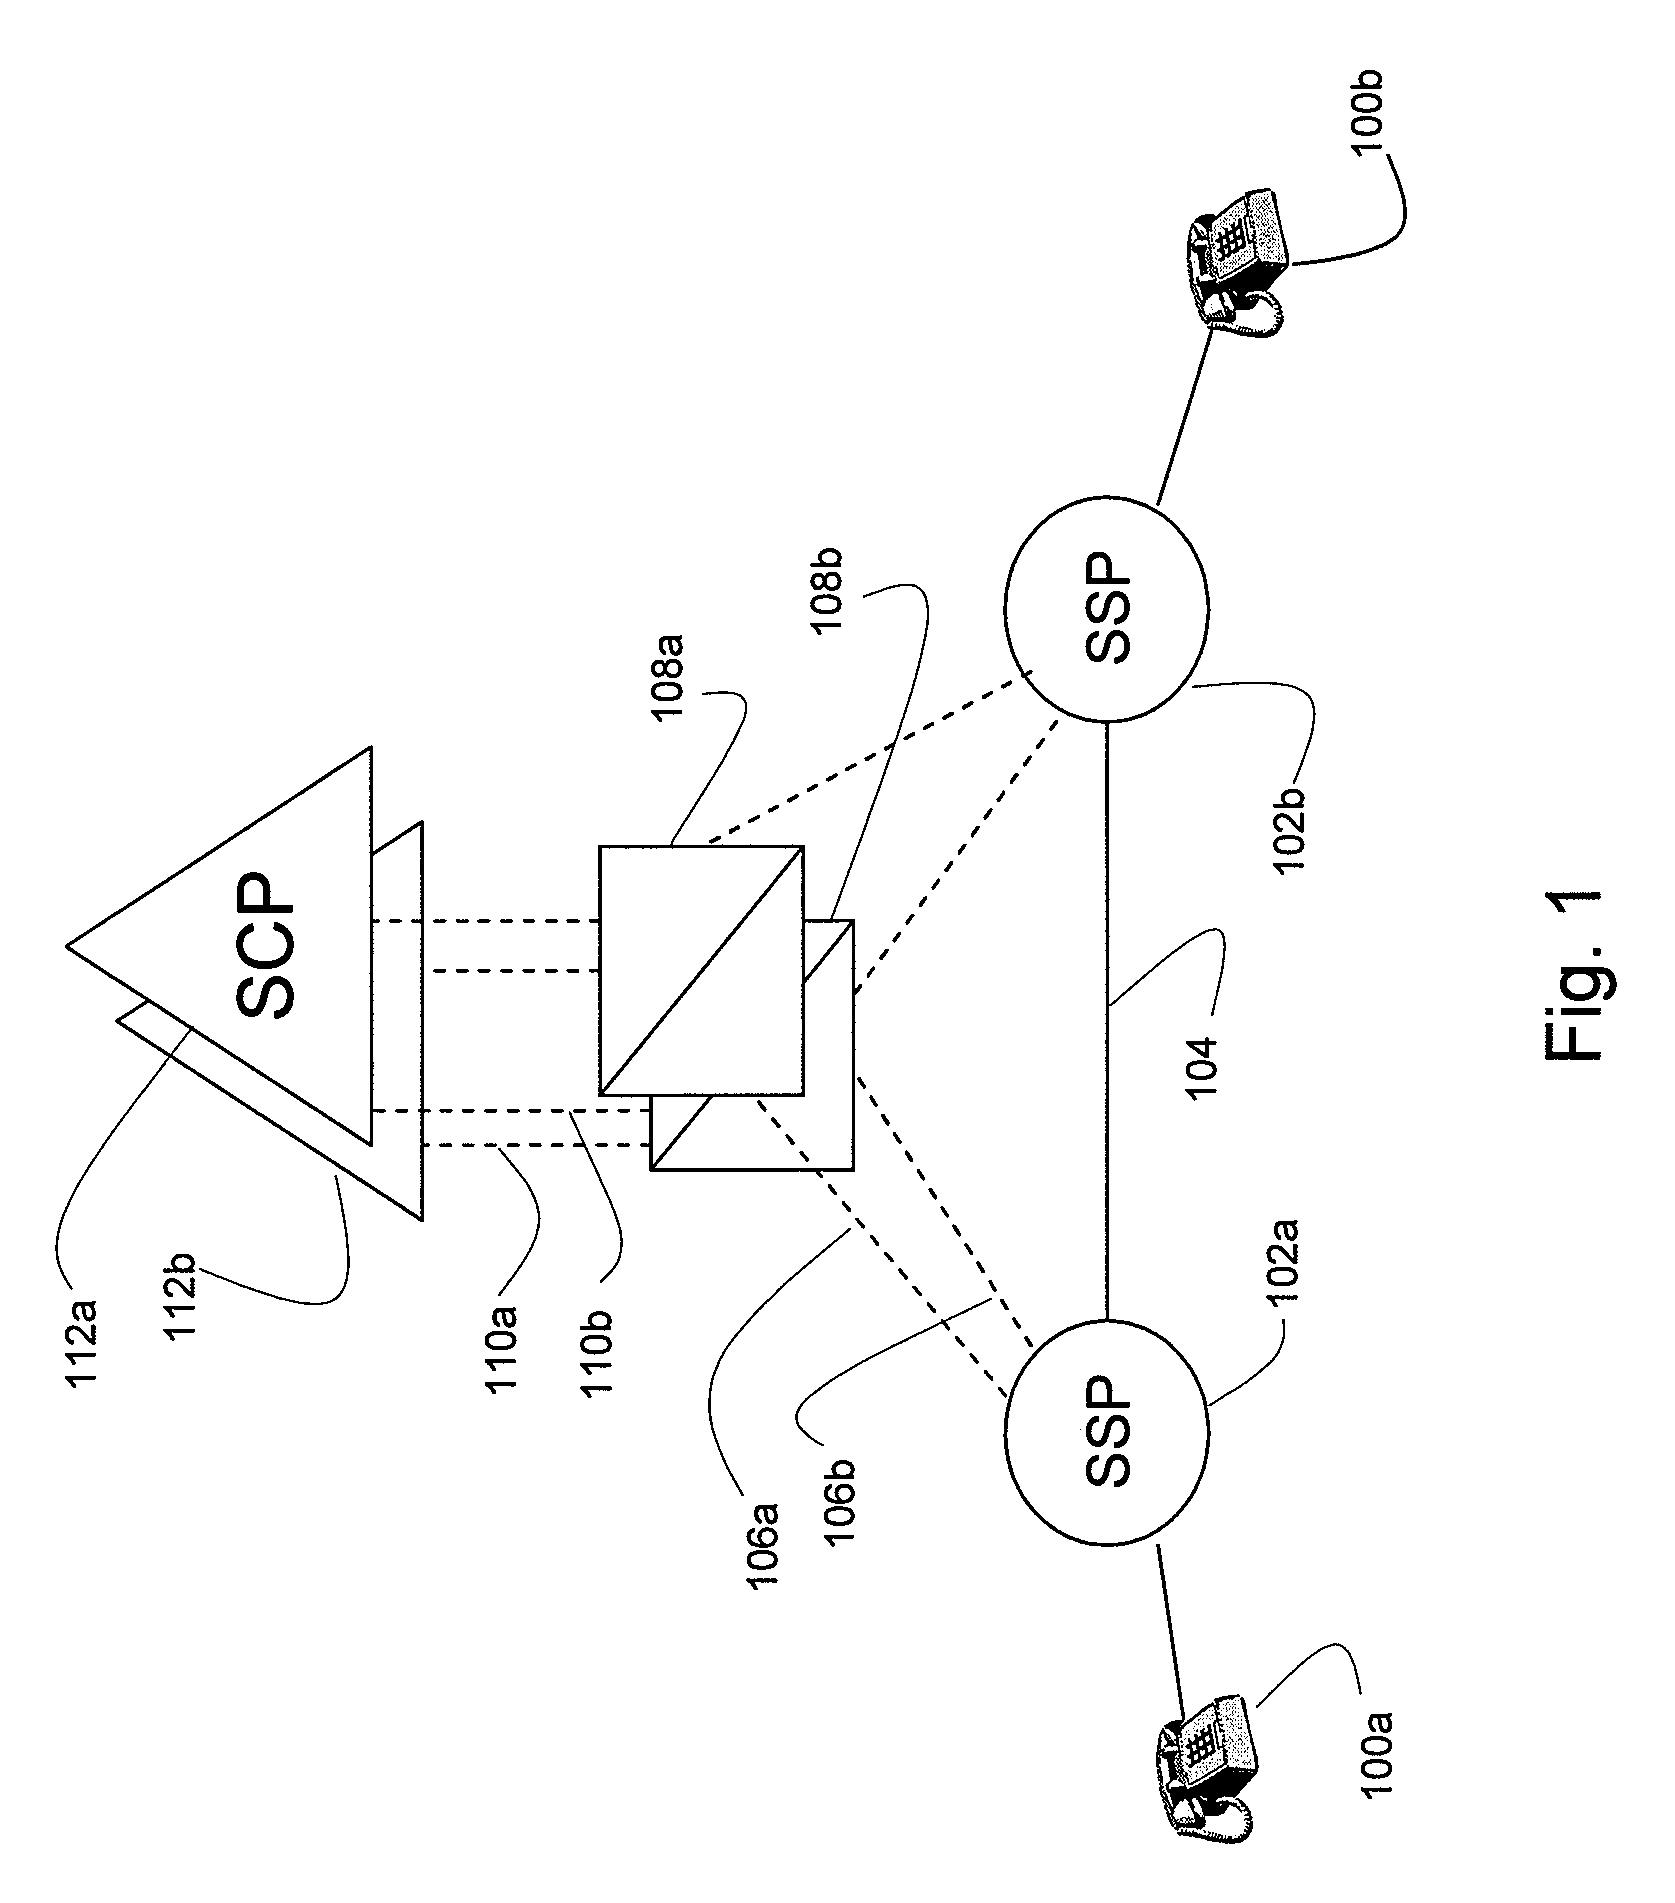 Systems and methods for using the advanced intelligent network to redirect data network traffic